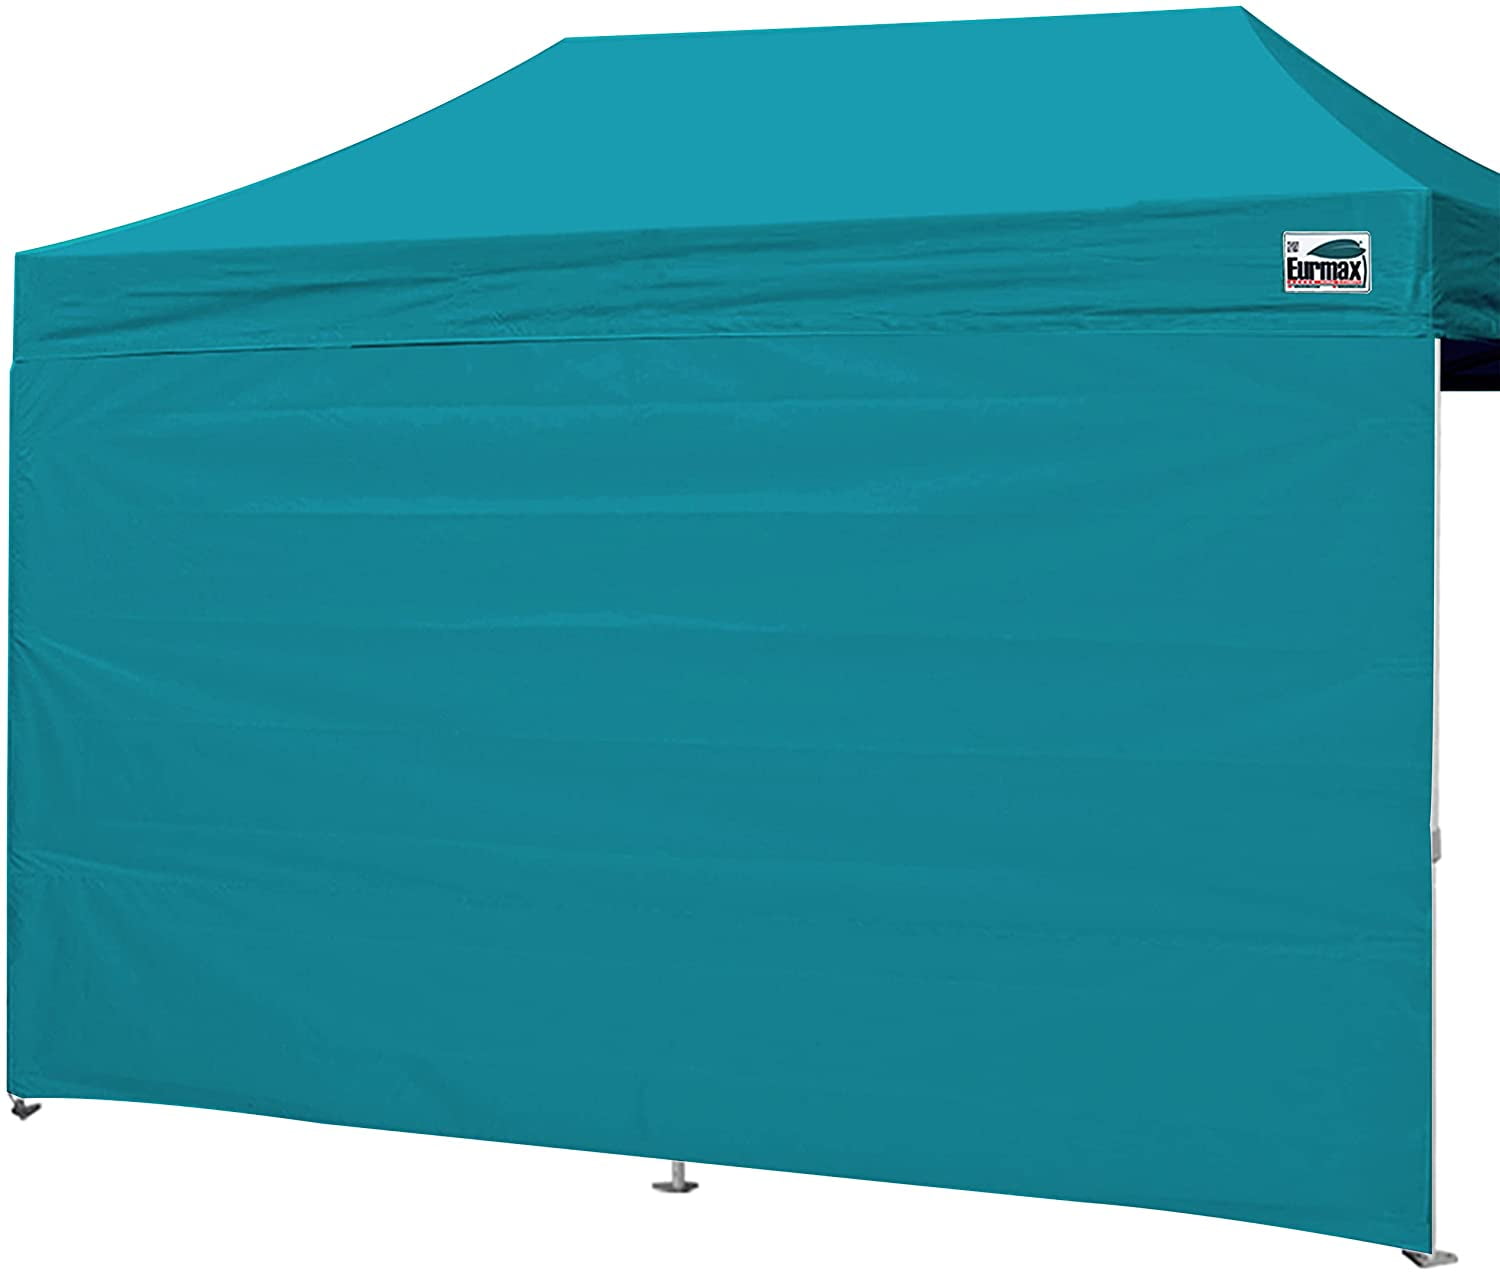 Canopy Walls 10x20，Outdoor Instant Canopies Eurmax Instant SunWall for 10x20 Gazebo Pop up Canopy Sky Blue 1 Pack Sidewall Only Removable Zipper End